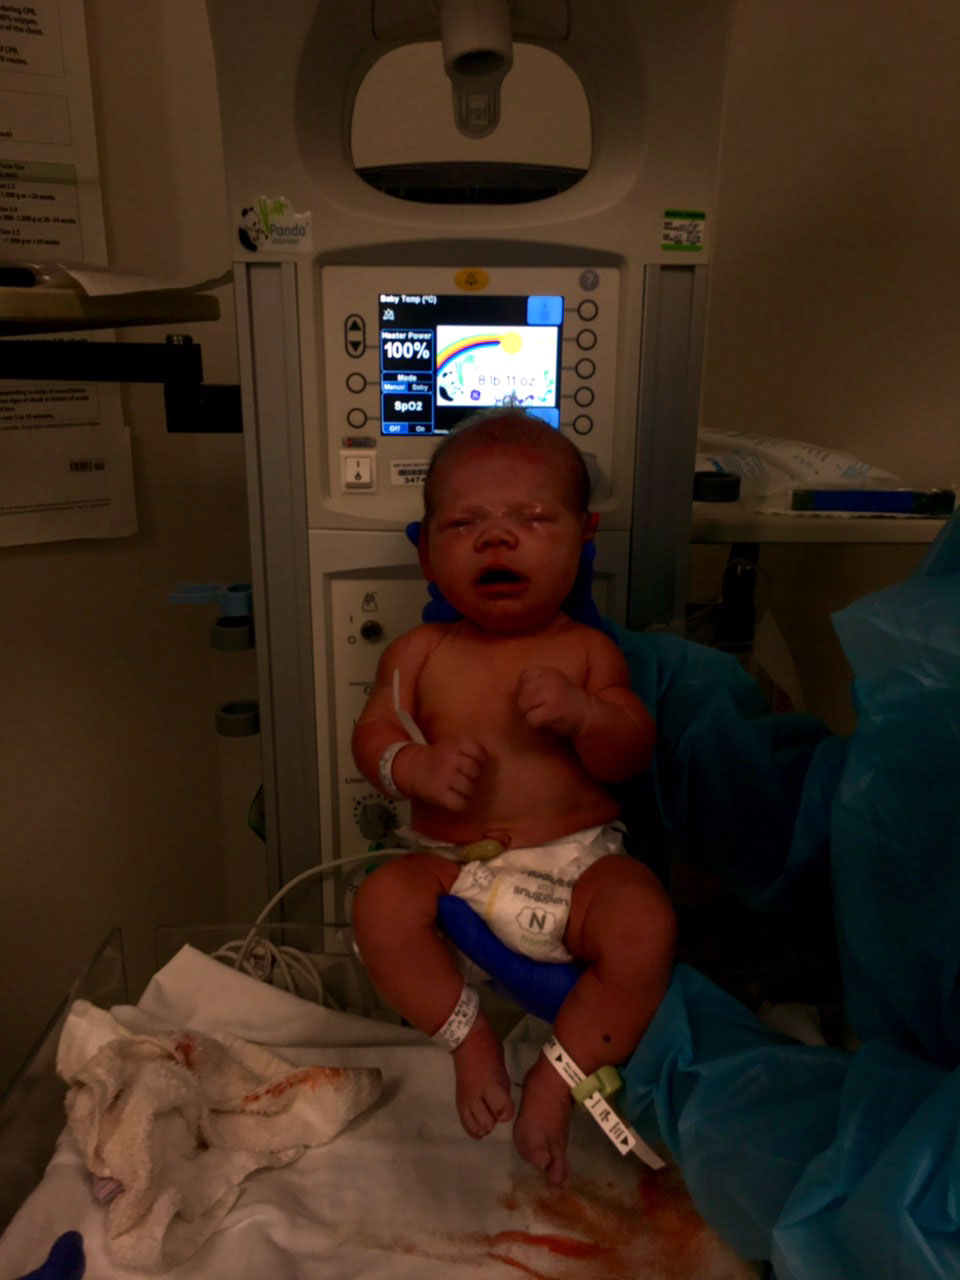 Perrin Lane Smith shortly after being born in 2018.